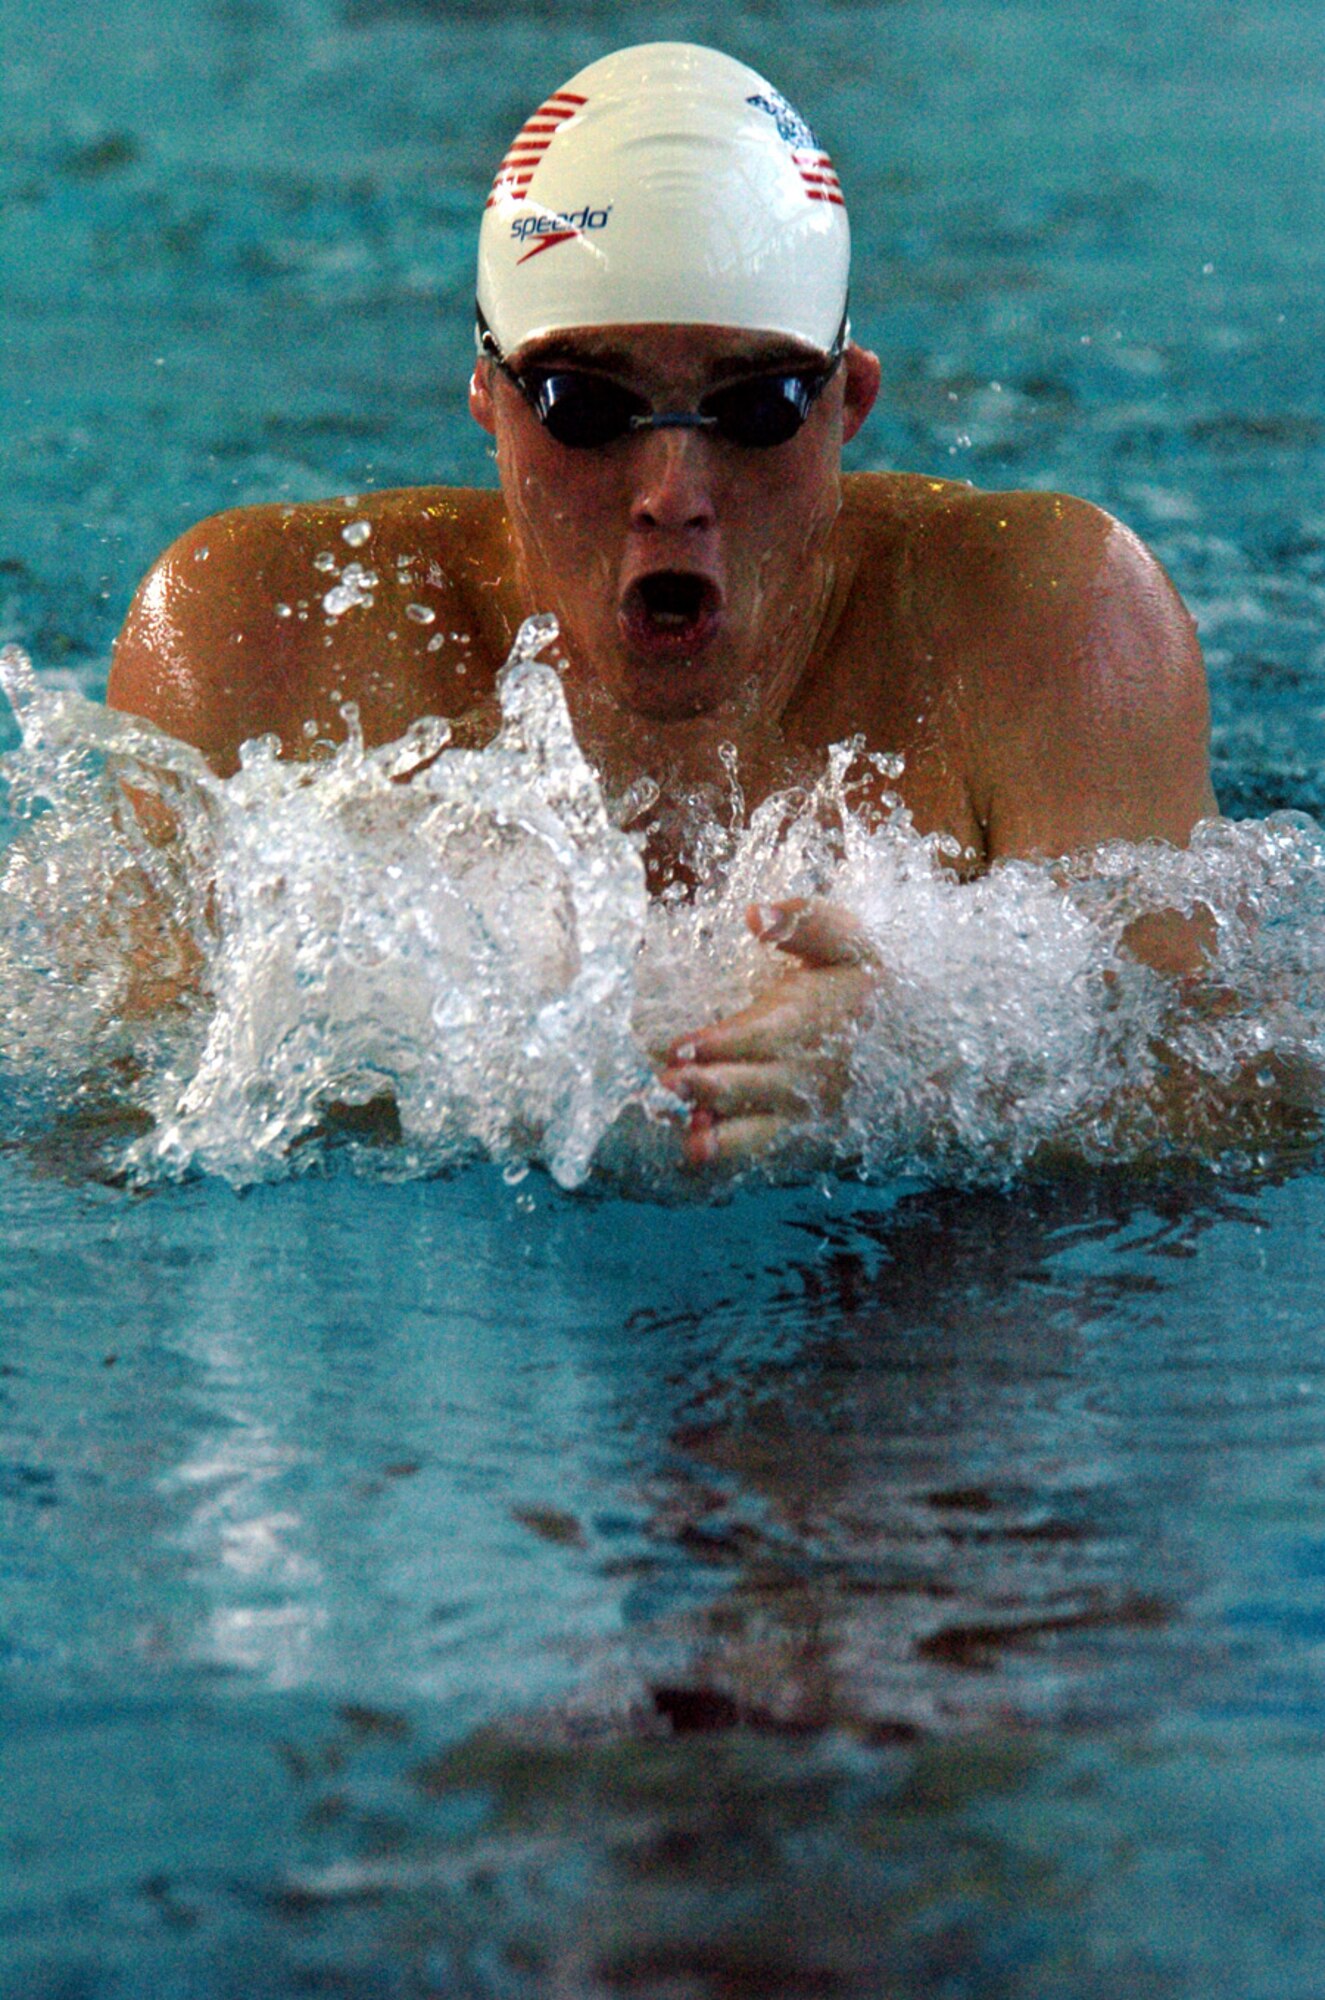 AEDC Capt. John Dayton, pictured here in a past swimming event, took home first place in the 100-meter breaststroke at the Headquarters Allied Air Command Ramstein Swimming Championships held April 19 in Zakopane, Poland. Dayton also swam with the Air Force’s freestyle relay team and served as team coach and captain. (Photo provided)